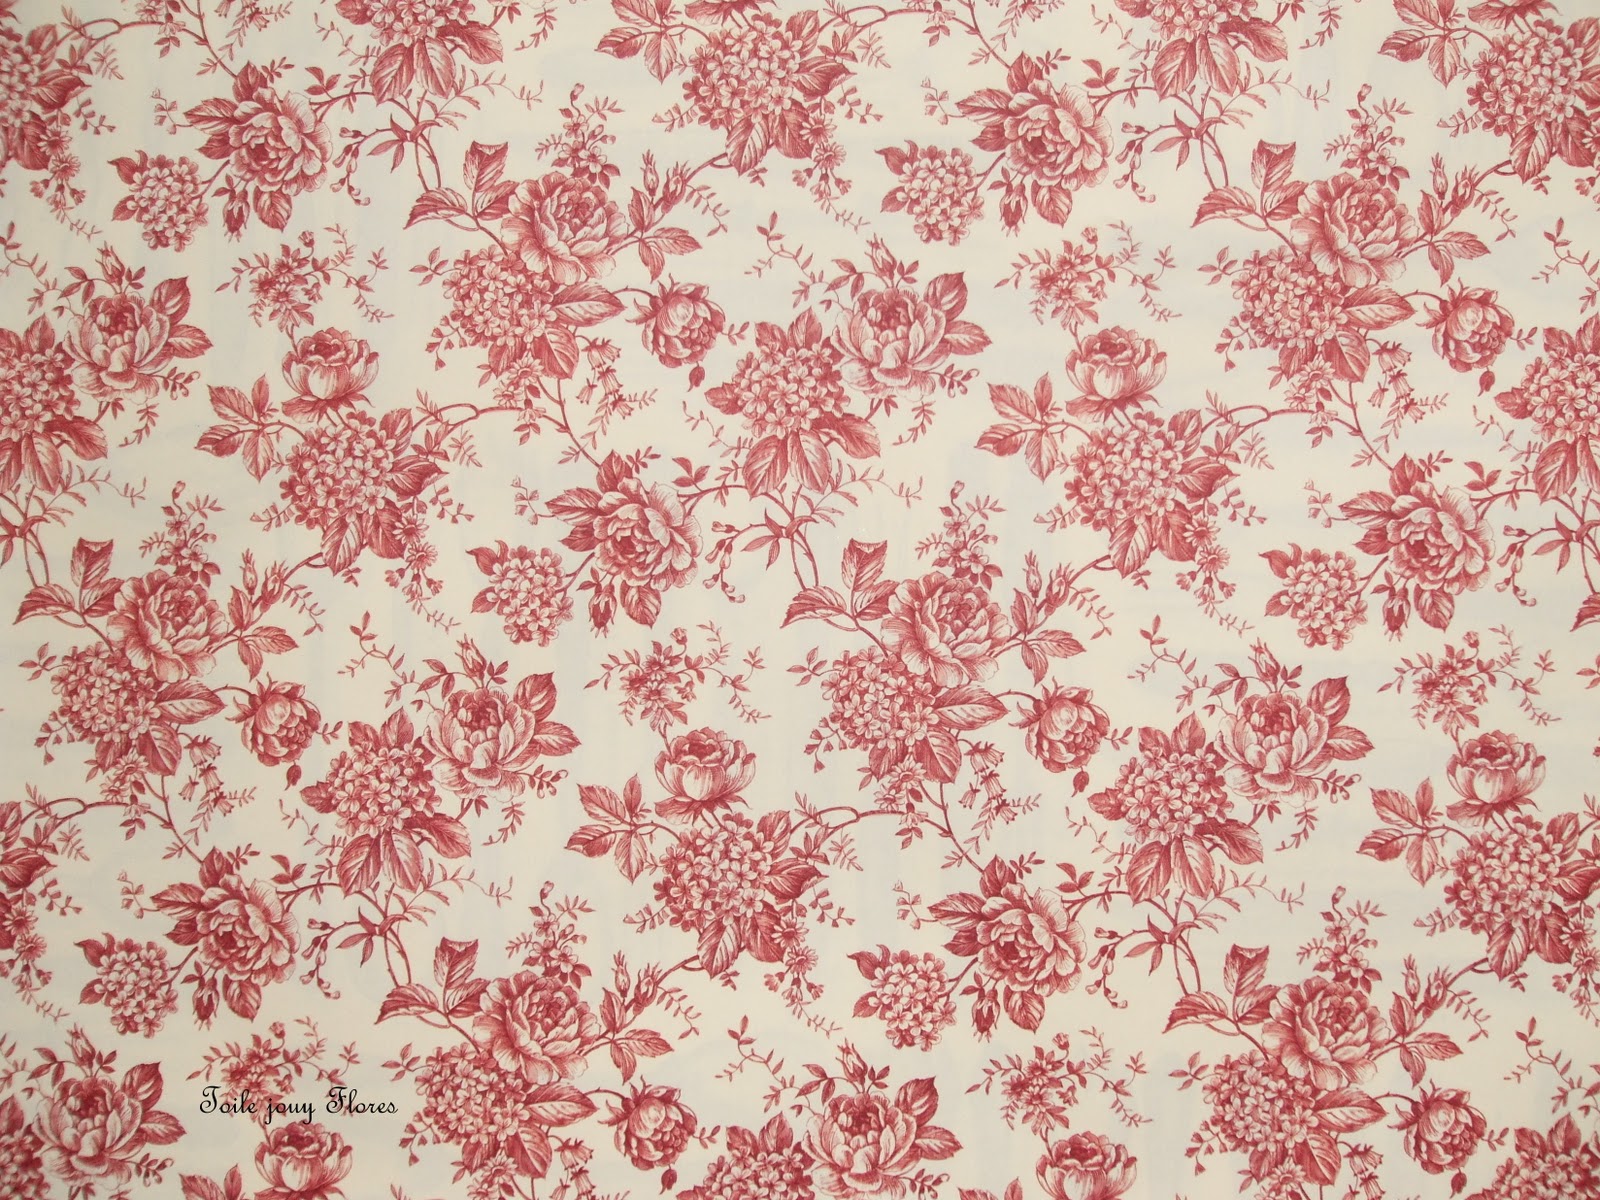 Toile Jouy Flores Jpg Patterns And